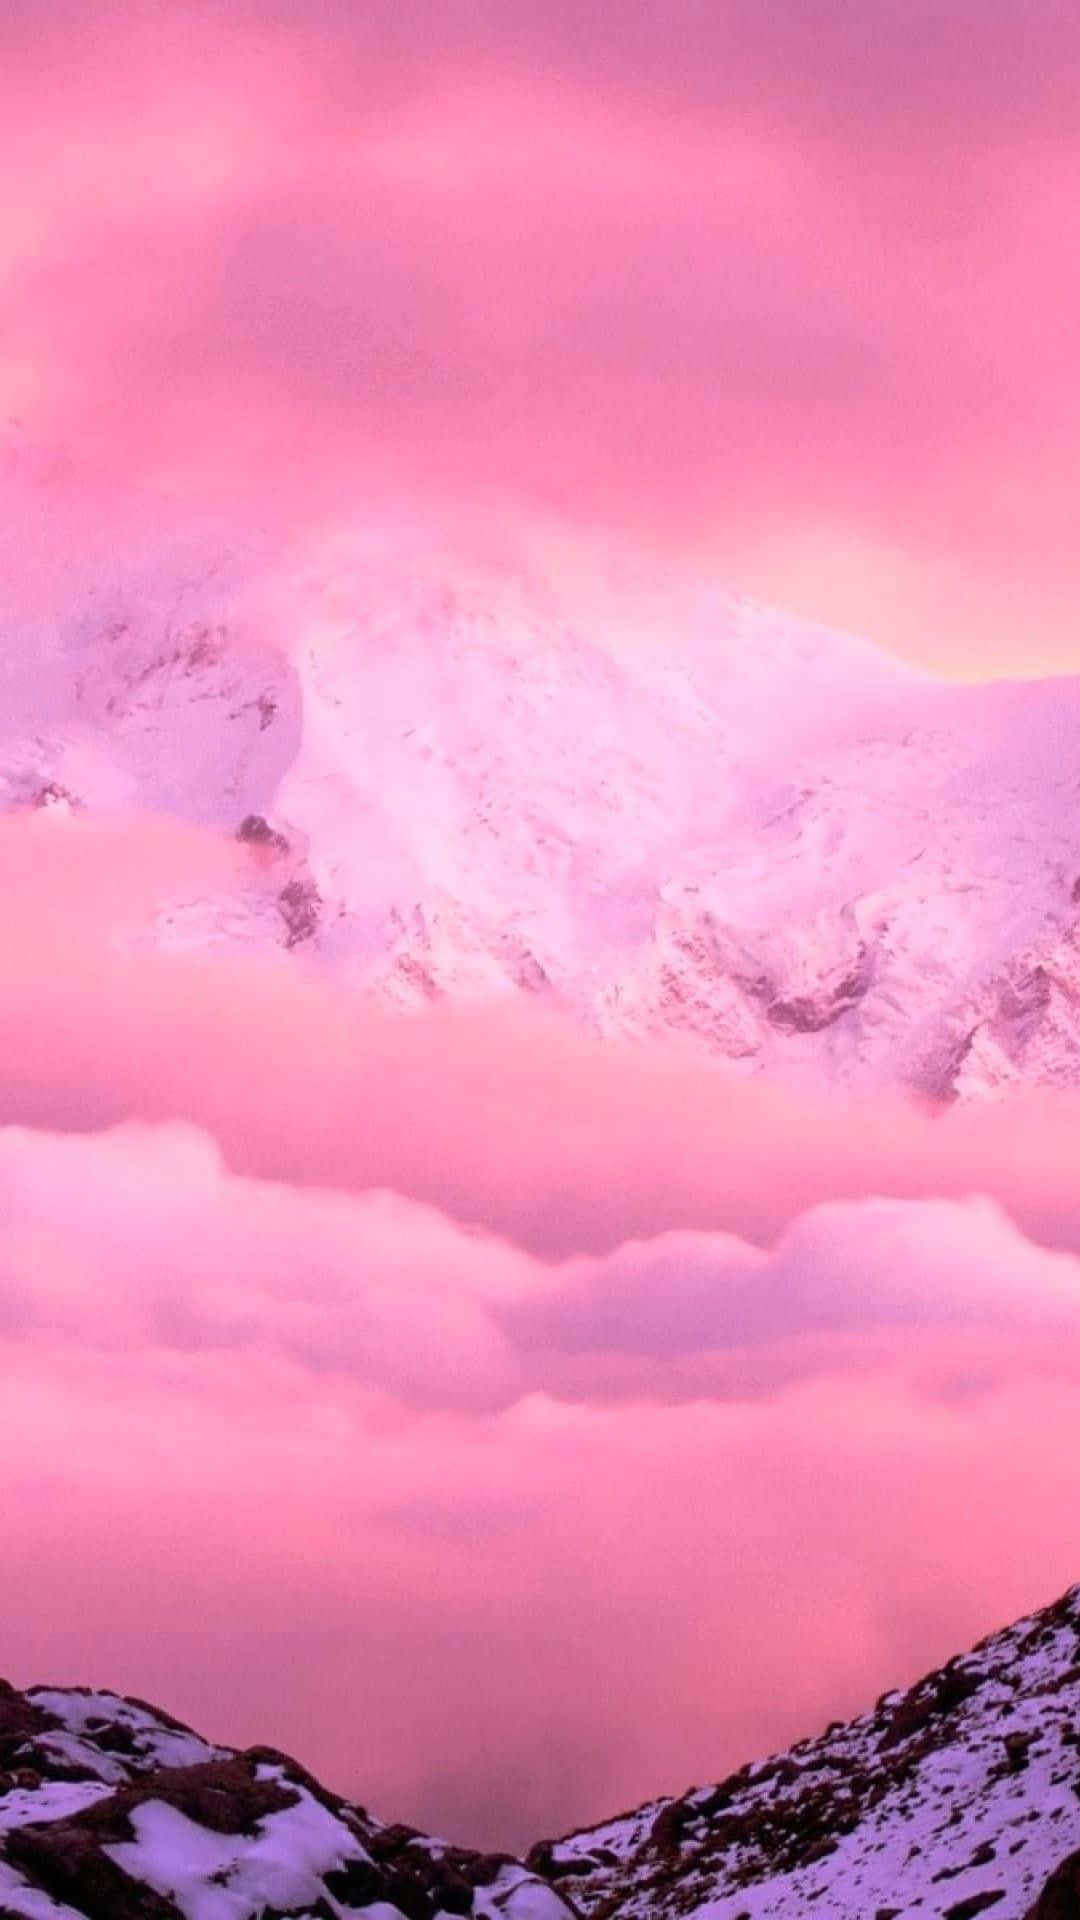 A Pink Sky With Snow Capped Mountains